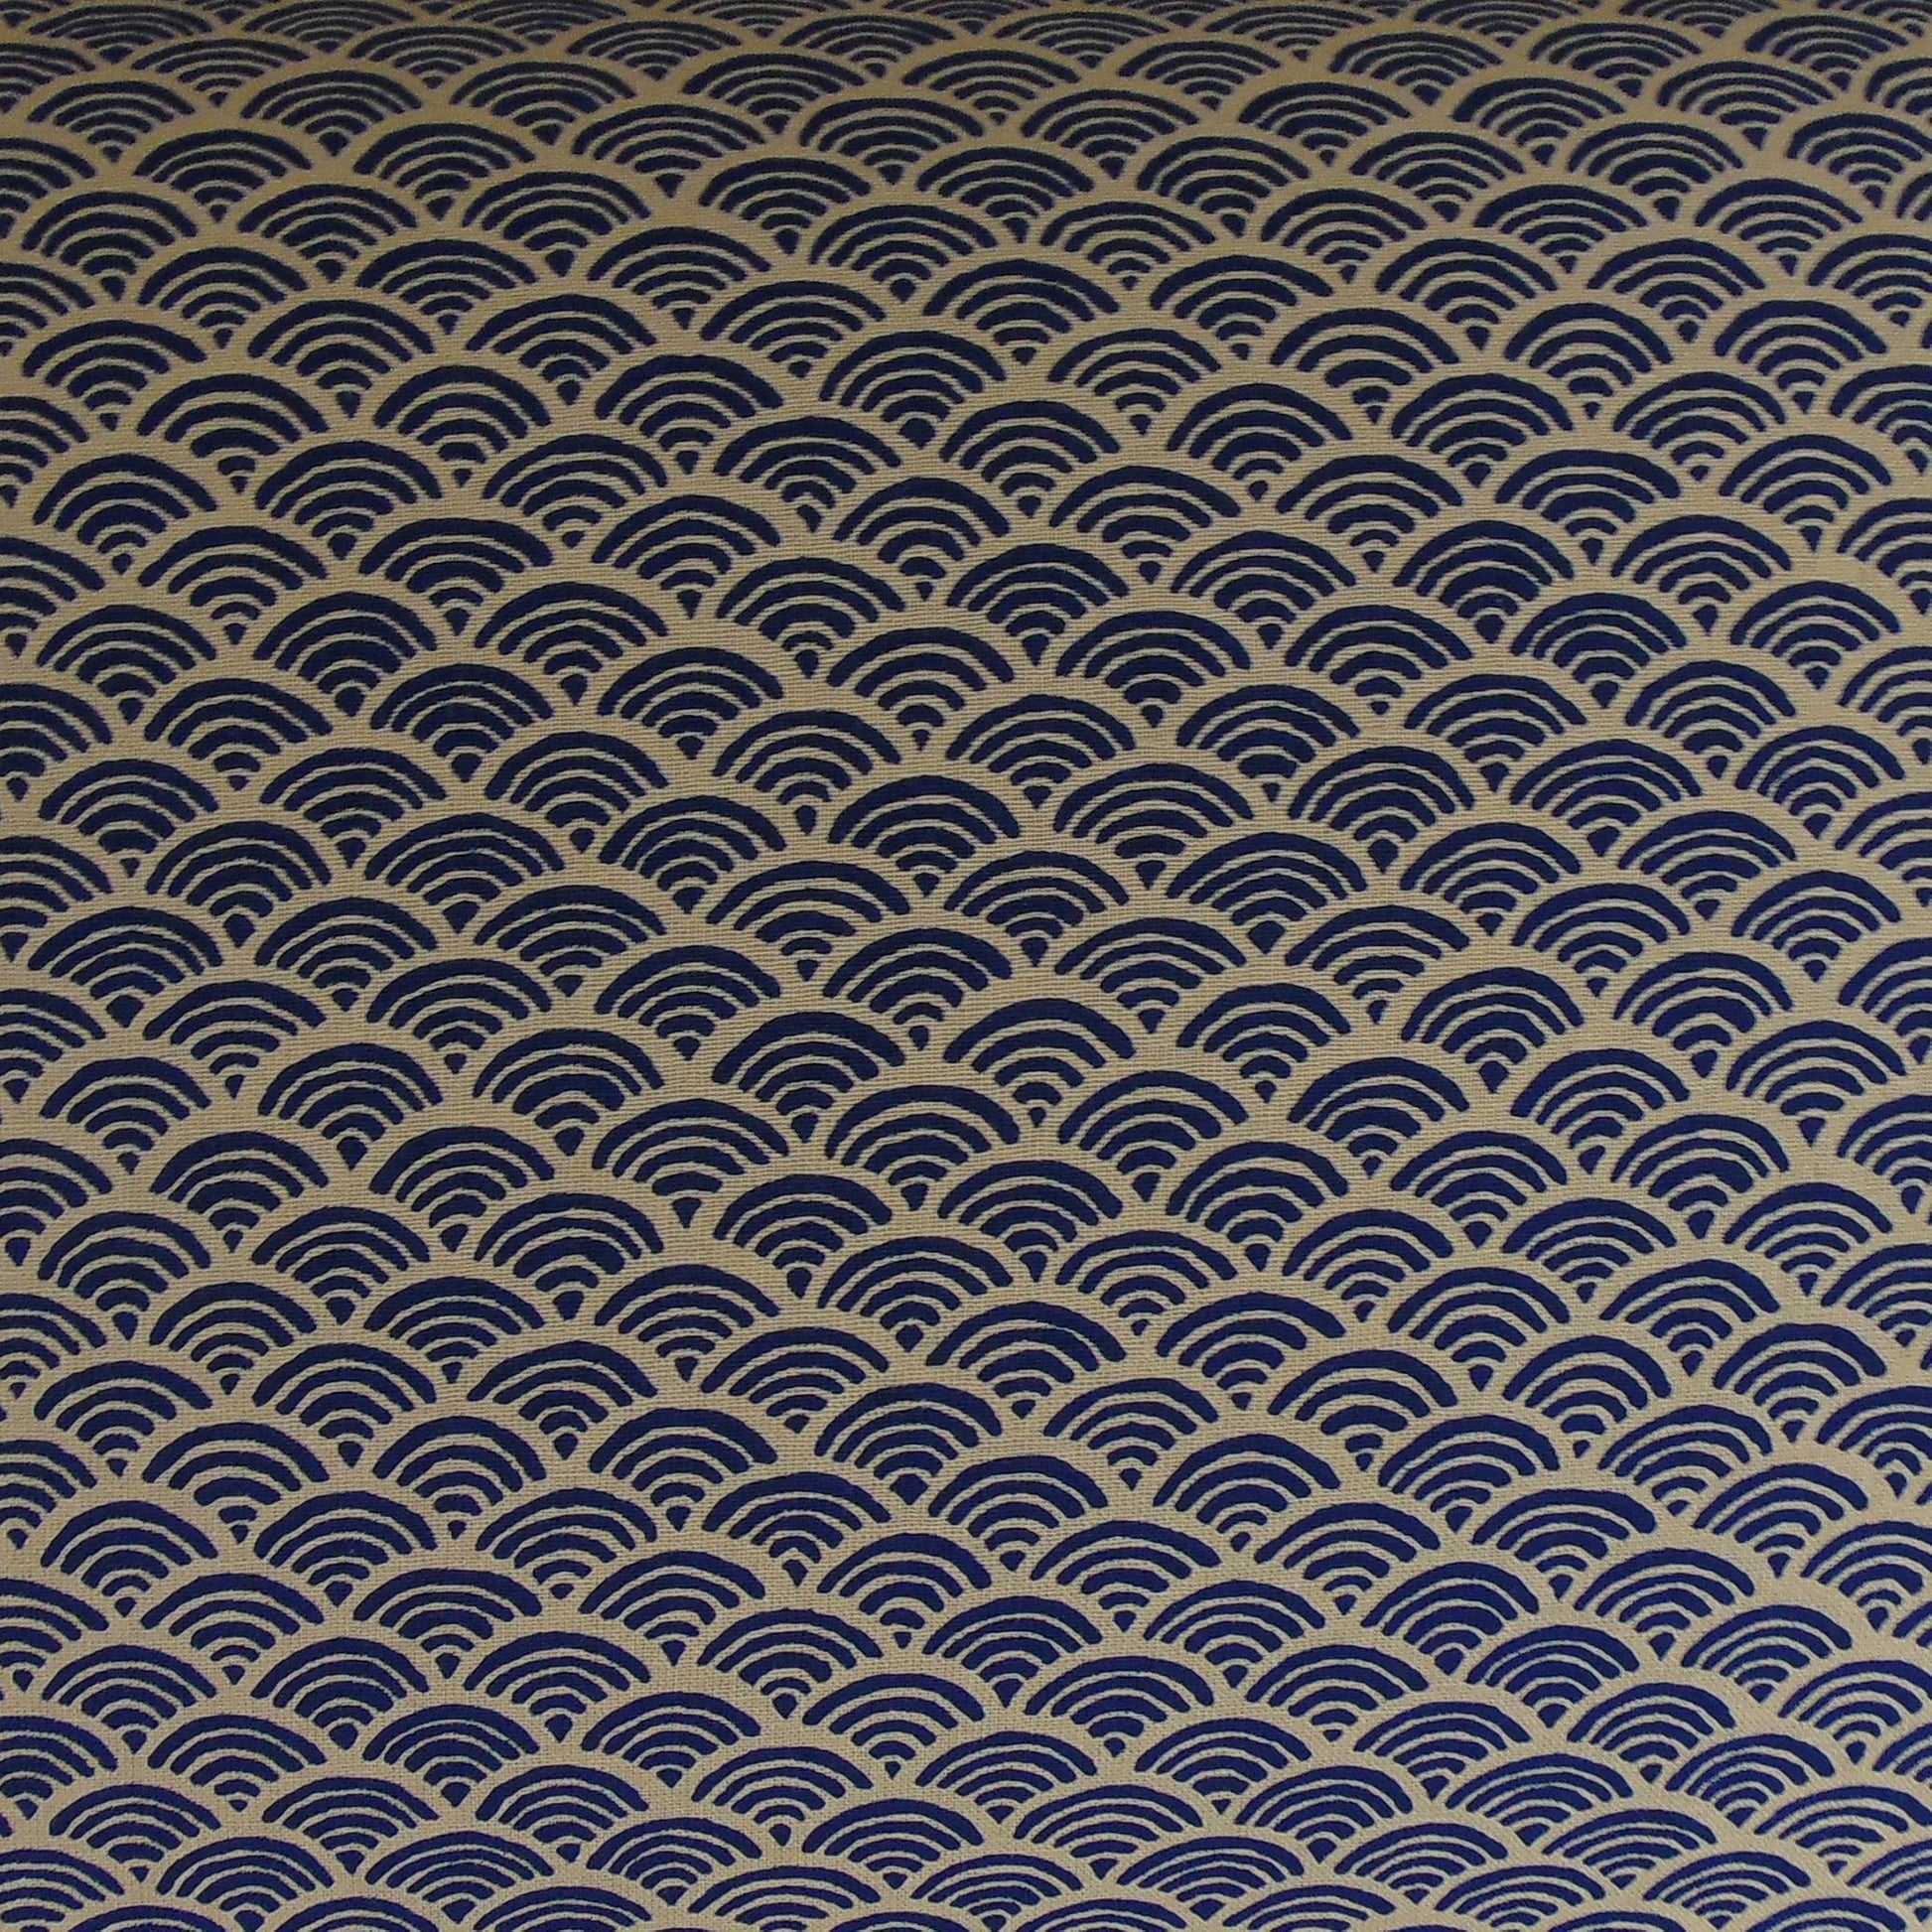 Imported Japanese Fabric - Nami Navy_Fabric_Imported from Japan_100% Cotton_Japanese Sleep System